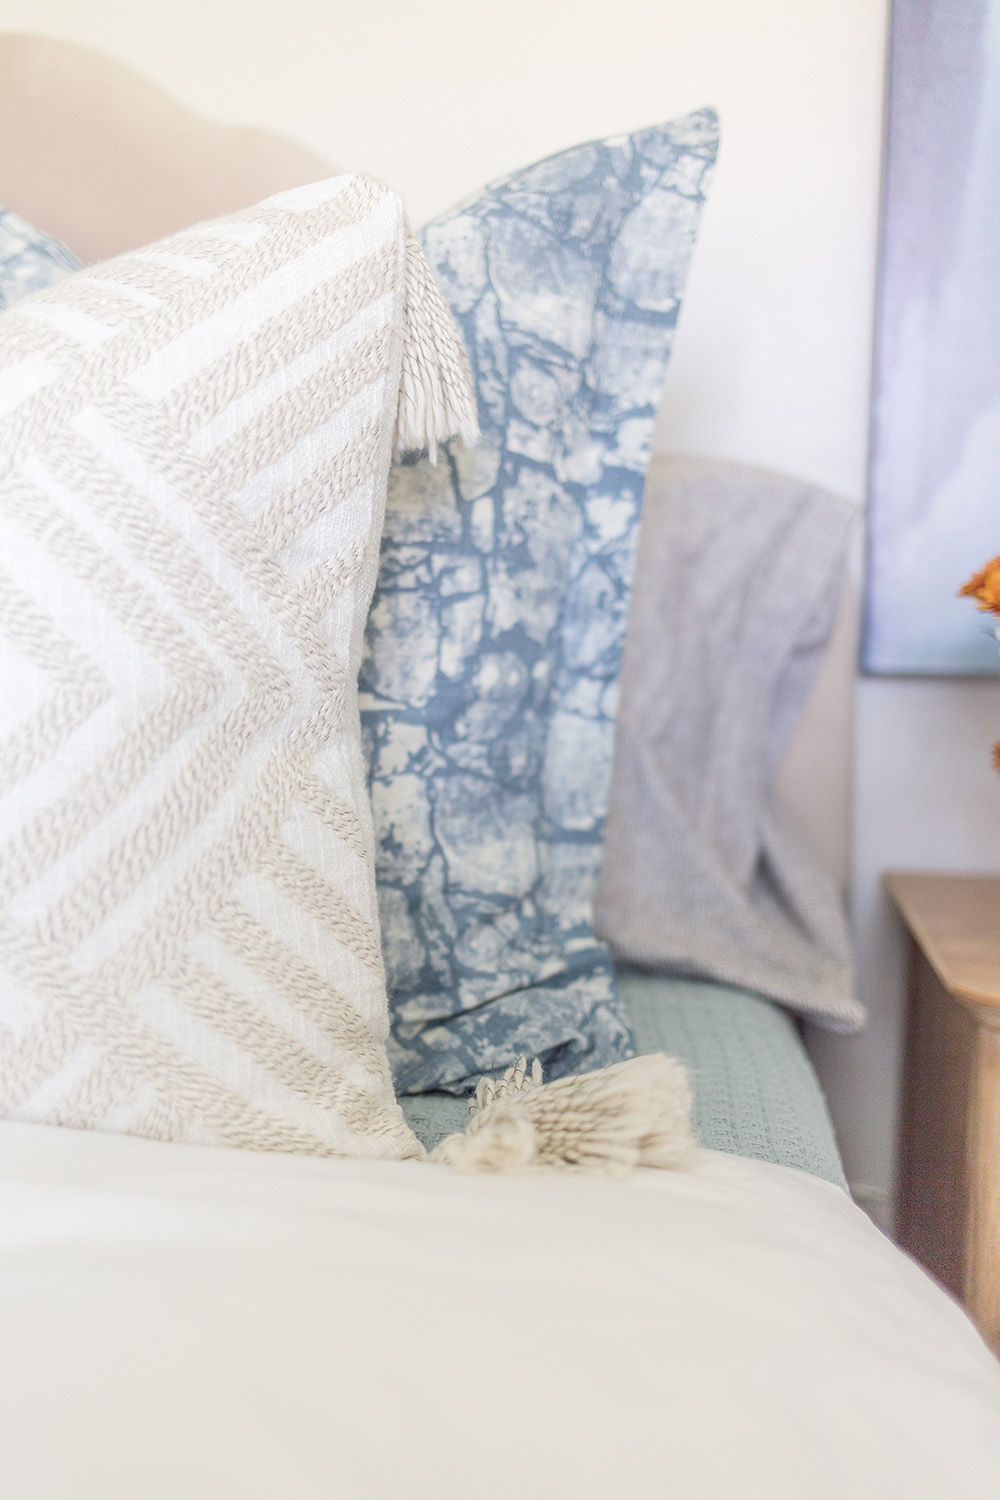 A white and natural geometric embroidered throw pillow sitting in front of a blue euro sham.